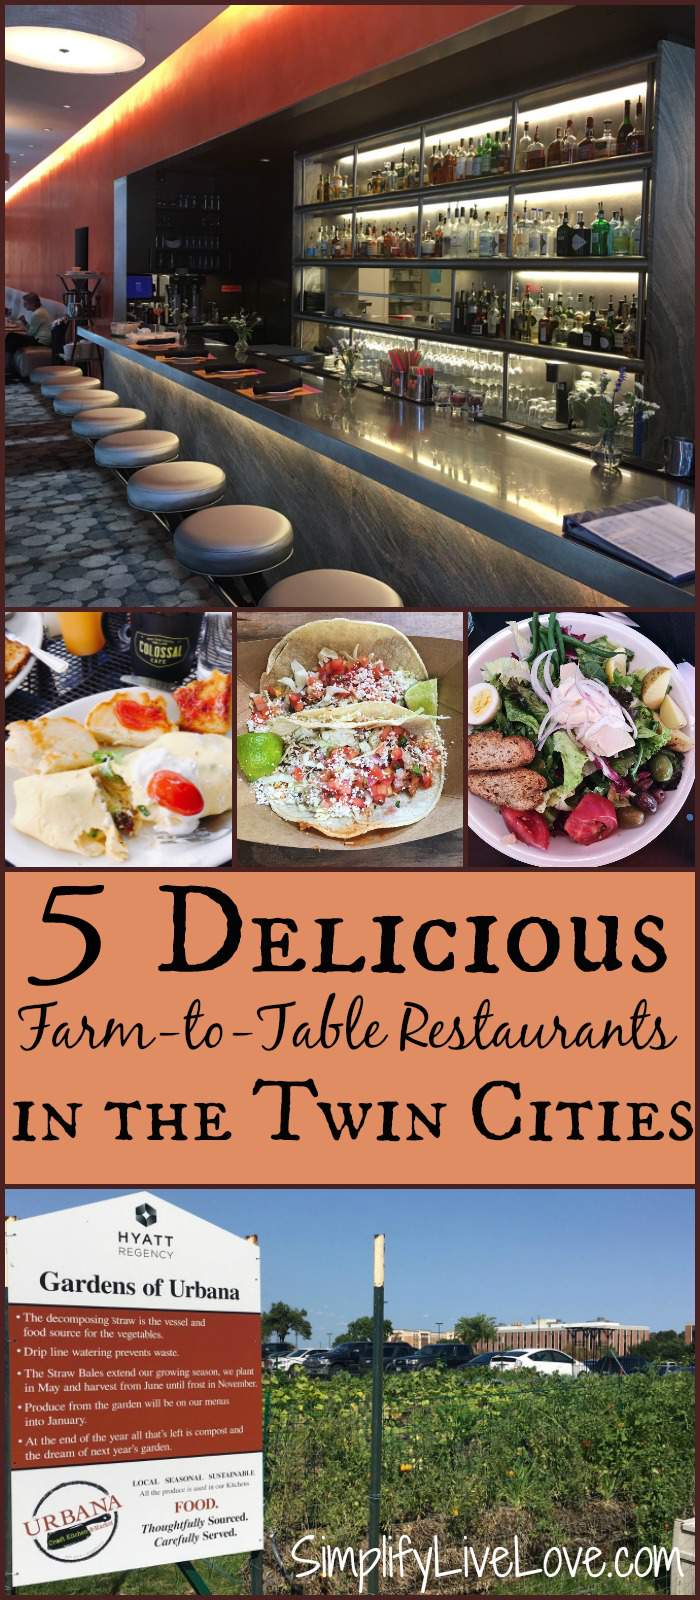 If you're heading to Minnesota, here 5 Delicious Farm-to-Table Restaurants you must try in the Twin Cities. USA